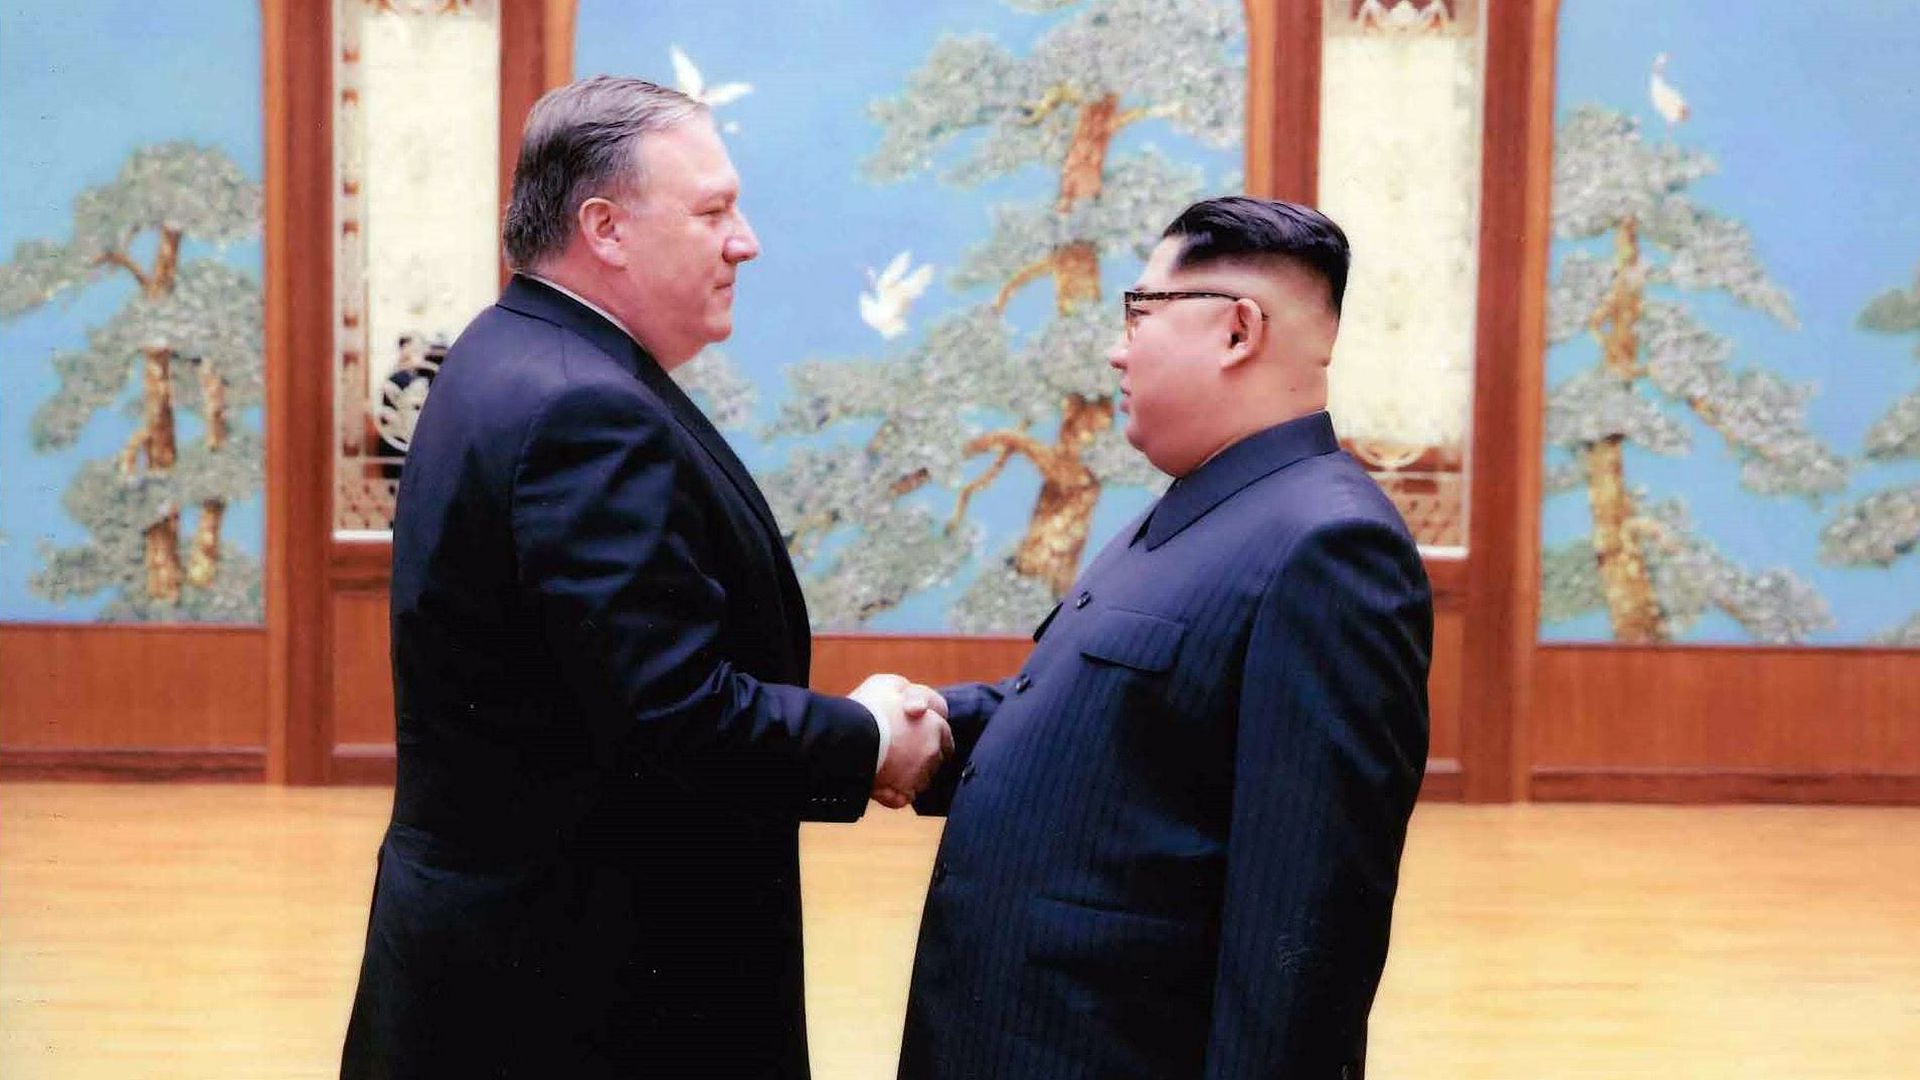 Mike Pompeo shakes hands with Kim Jong-un